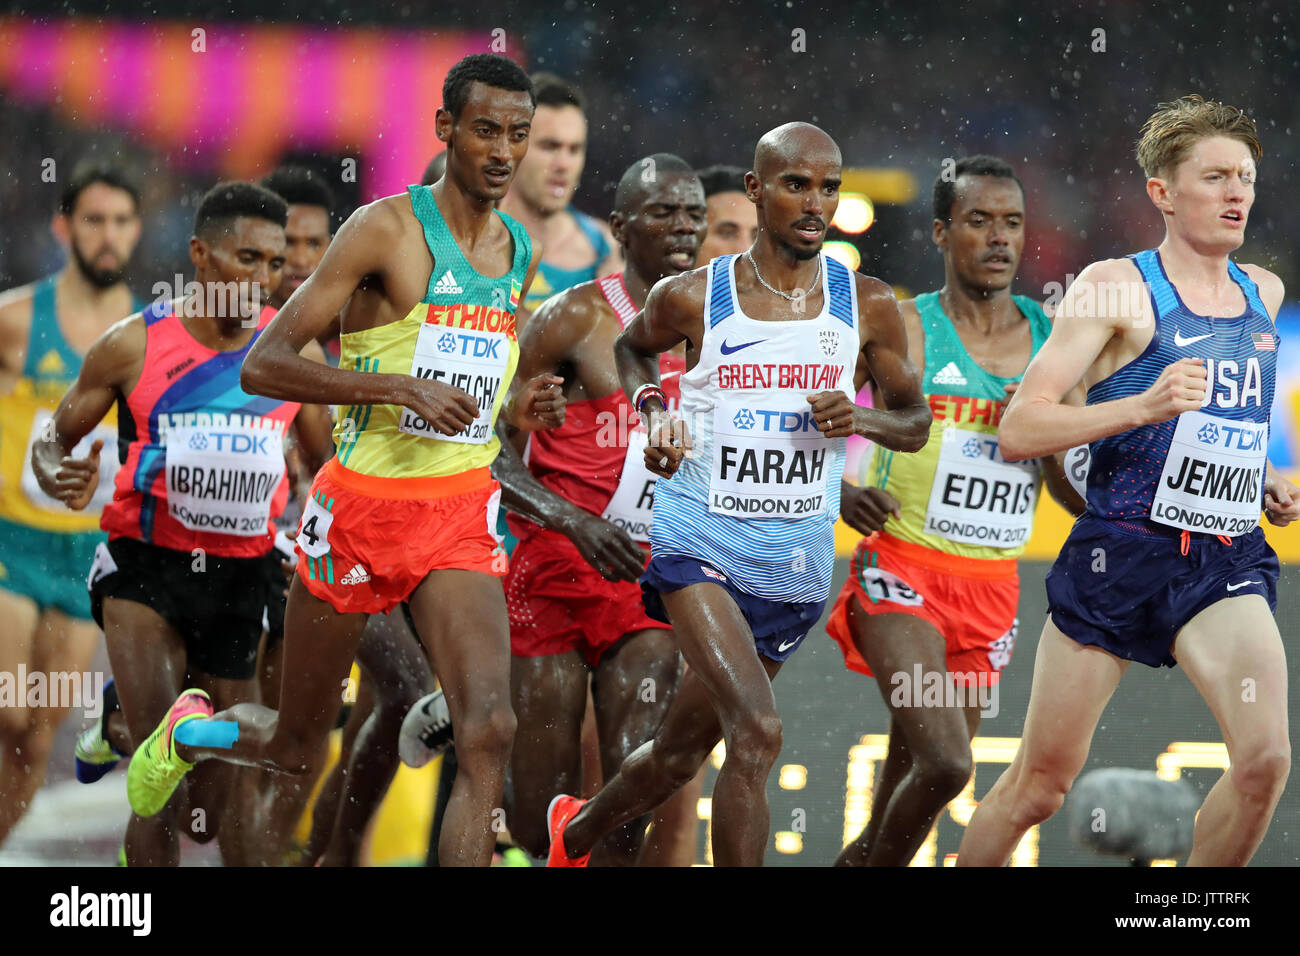 London, UK. 09-Aug-17. Mo FARAH, competing in the 5000m Men's Heat 1 at the 2017, IAAF World Championships, Queen Elizabeth Olympic Park, Stratford, London, UK. Credit: Simon Balson/Alamy Live News Stock Photo